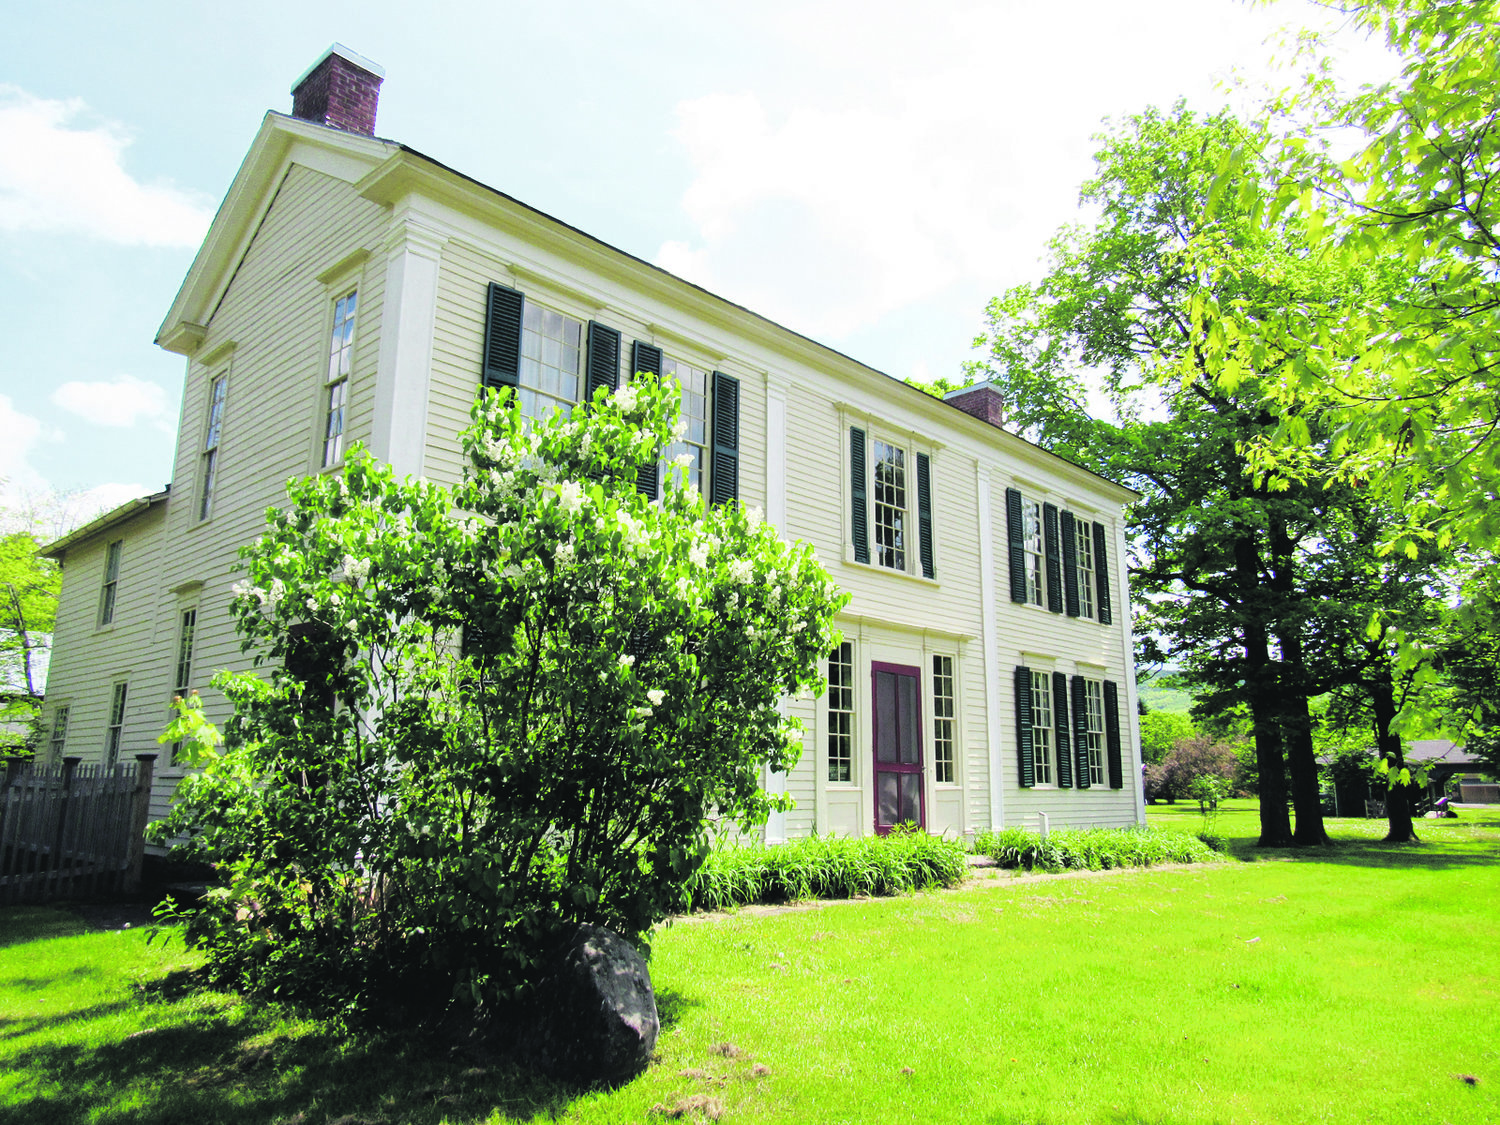 The Gideon Frisbee House, as shown Wednesday, May 25, on the grounds of the Delaware County Historical Association was the birthplace of Delaware County.